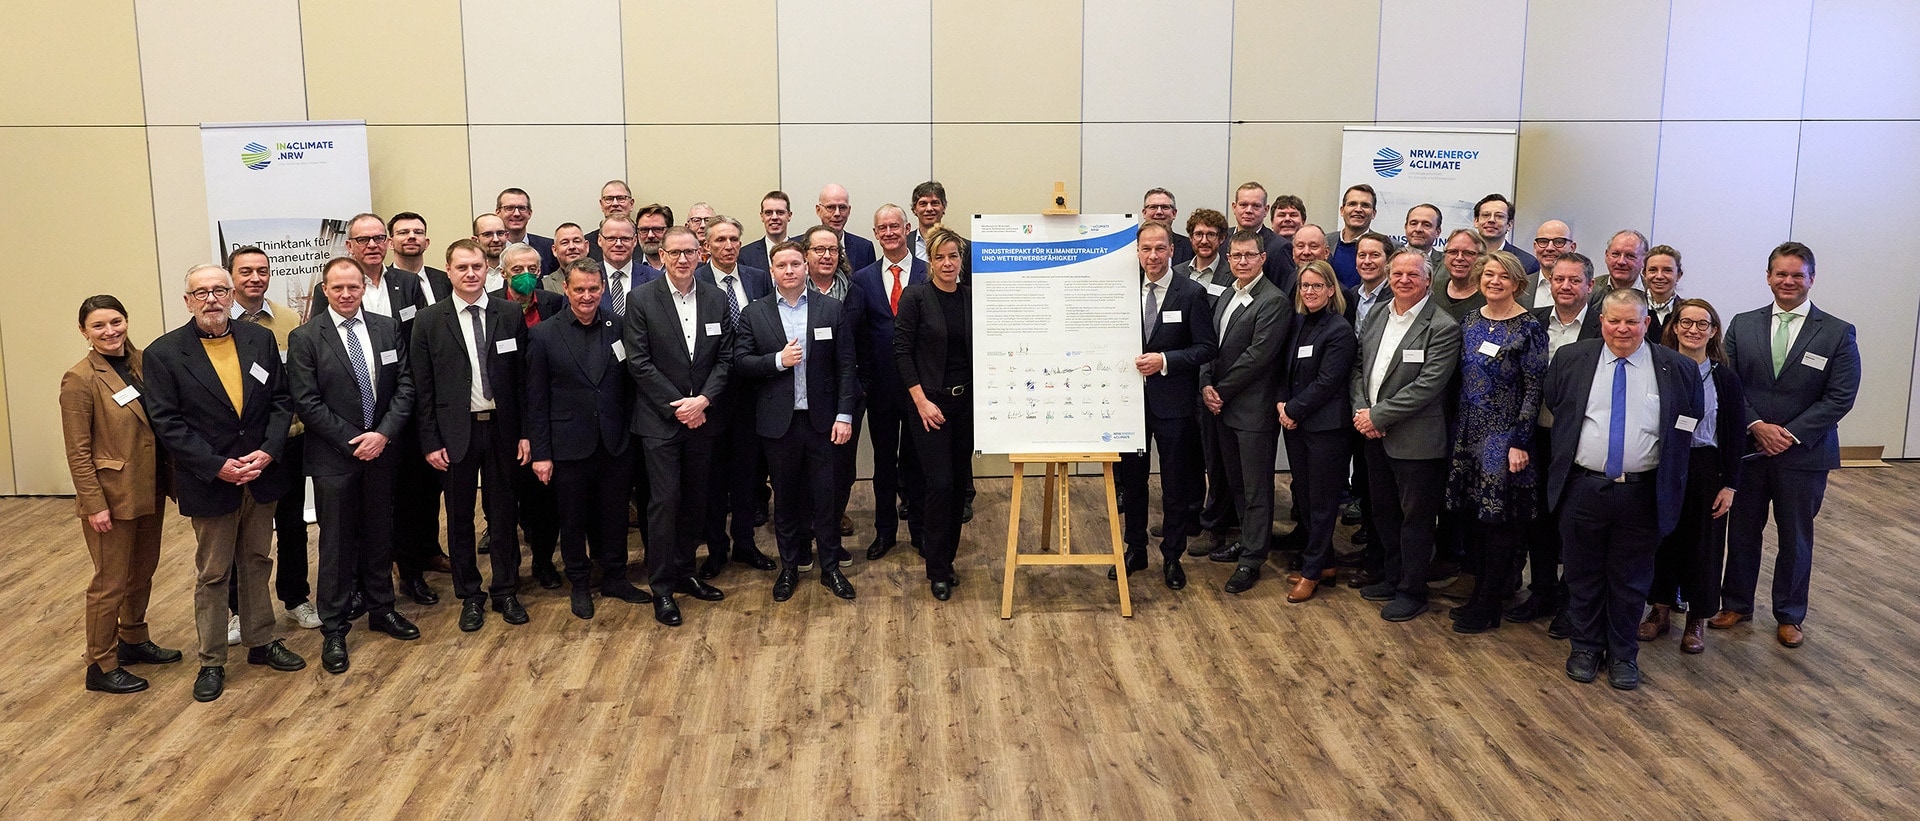 On 15 December 2022 high-ranking representatives from business and politics signed the Industrial pact for North Rhine-Westphalia (NRW). The agreement aims to transform NRW into Europe’s first climate-neutral industrial region by 2045 at the latest.